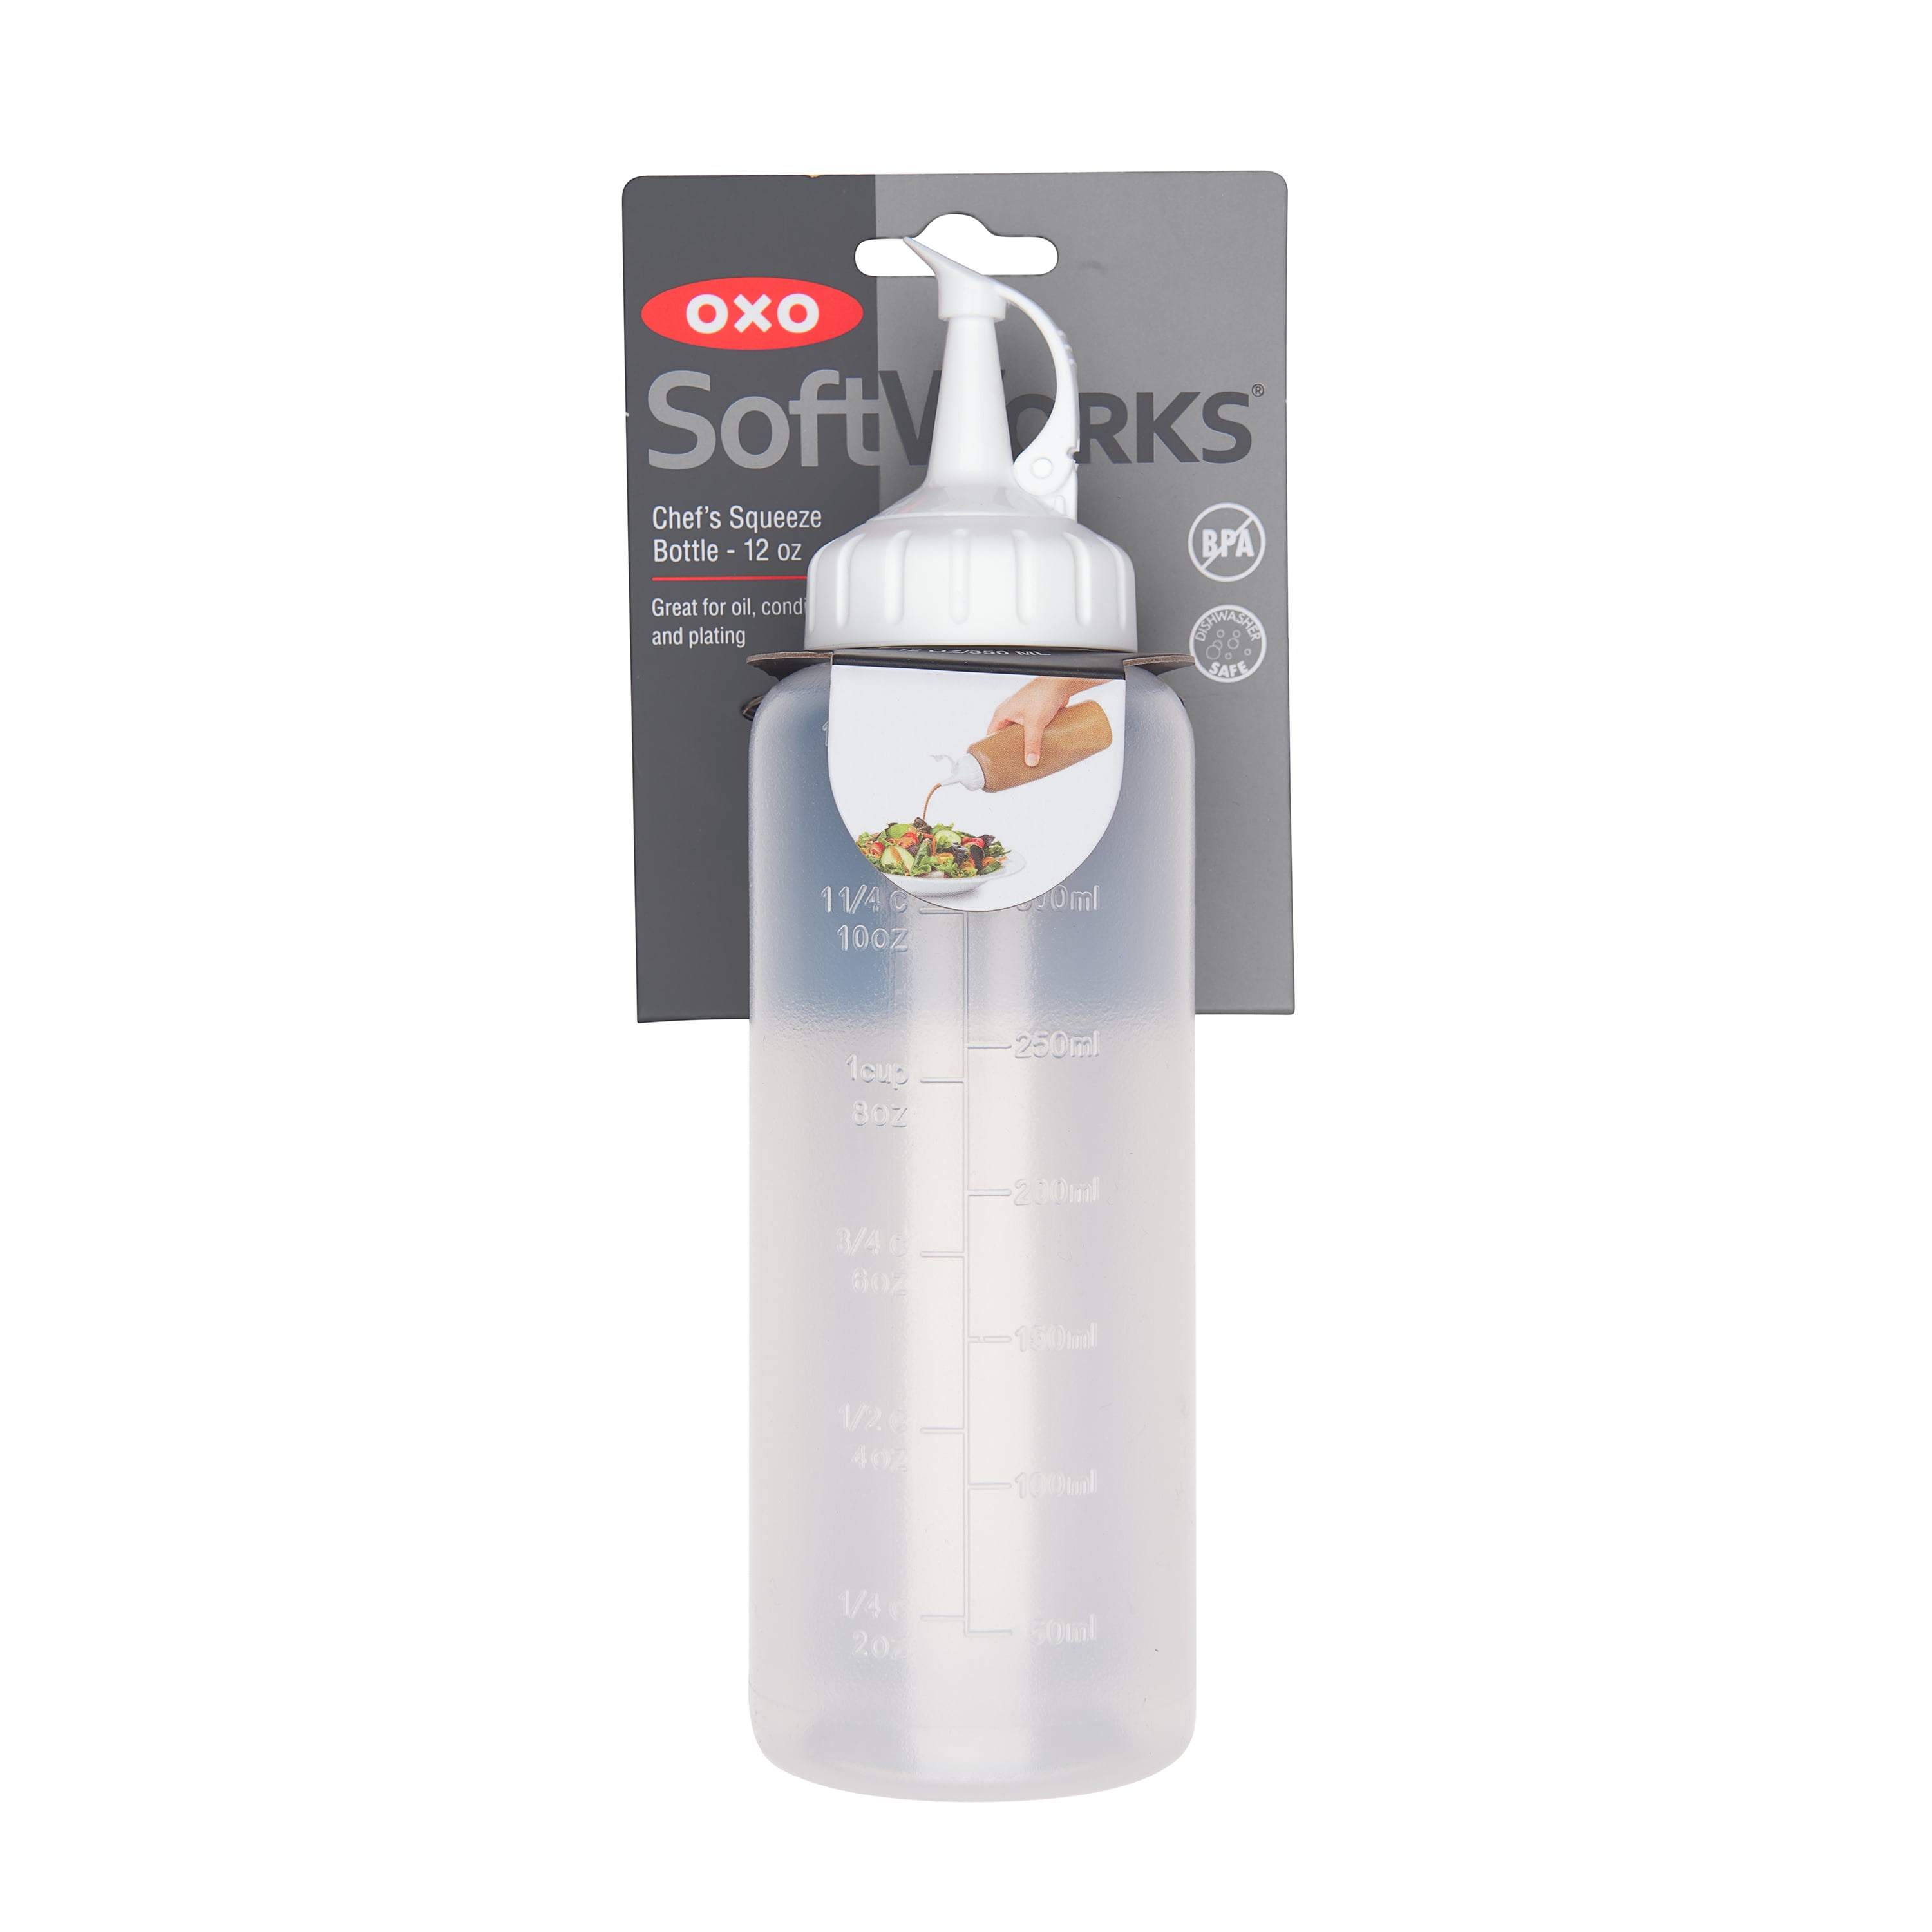 OXO Softworks Chef's Squeeze Plastic Bottle, Medium 